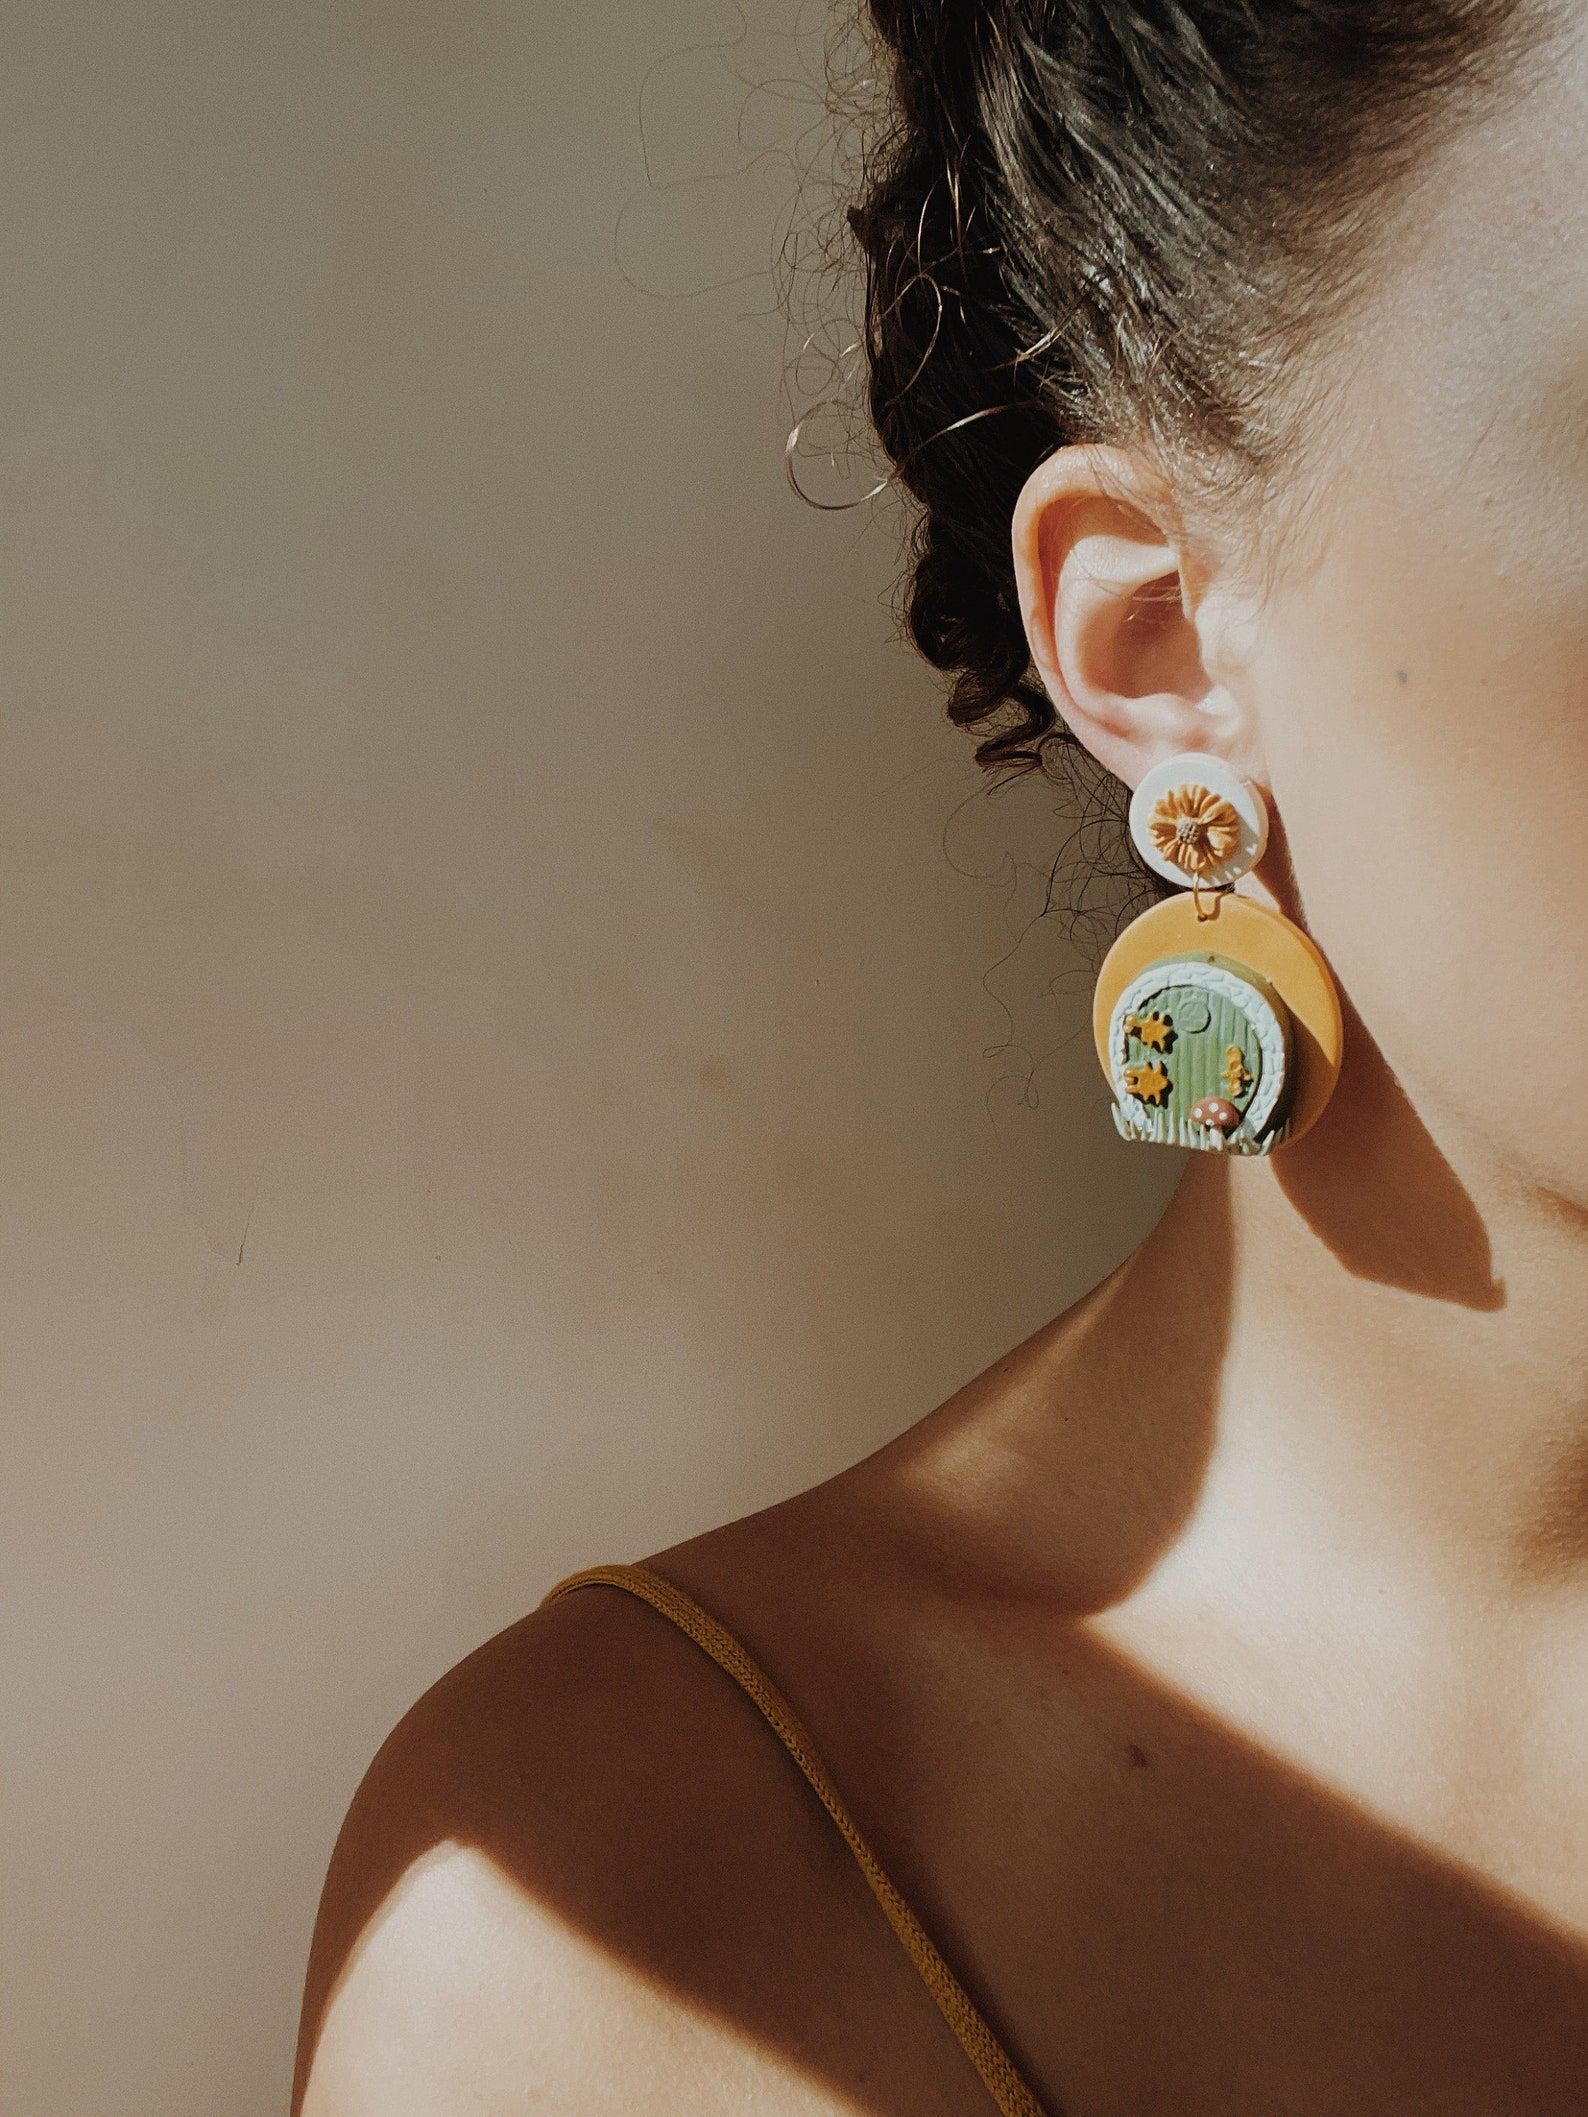 A photo of a woman wearing dangly earrings that look like a round green hobbit house door, with tiny hinges and mushrooms